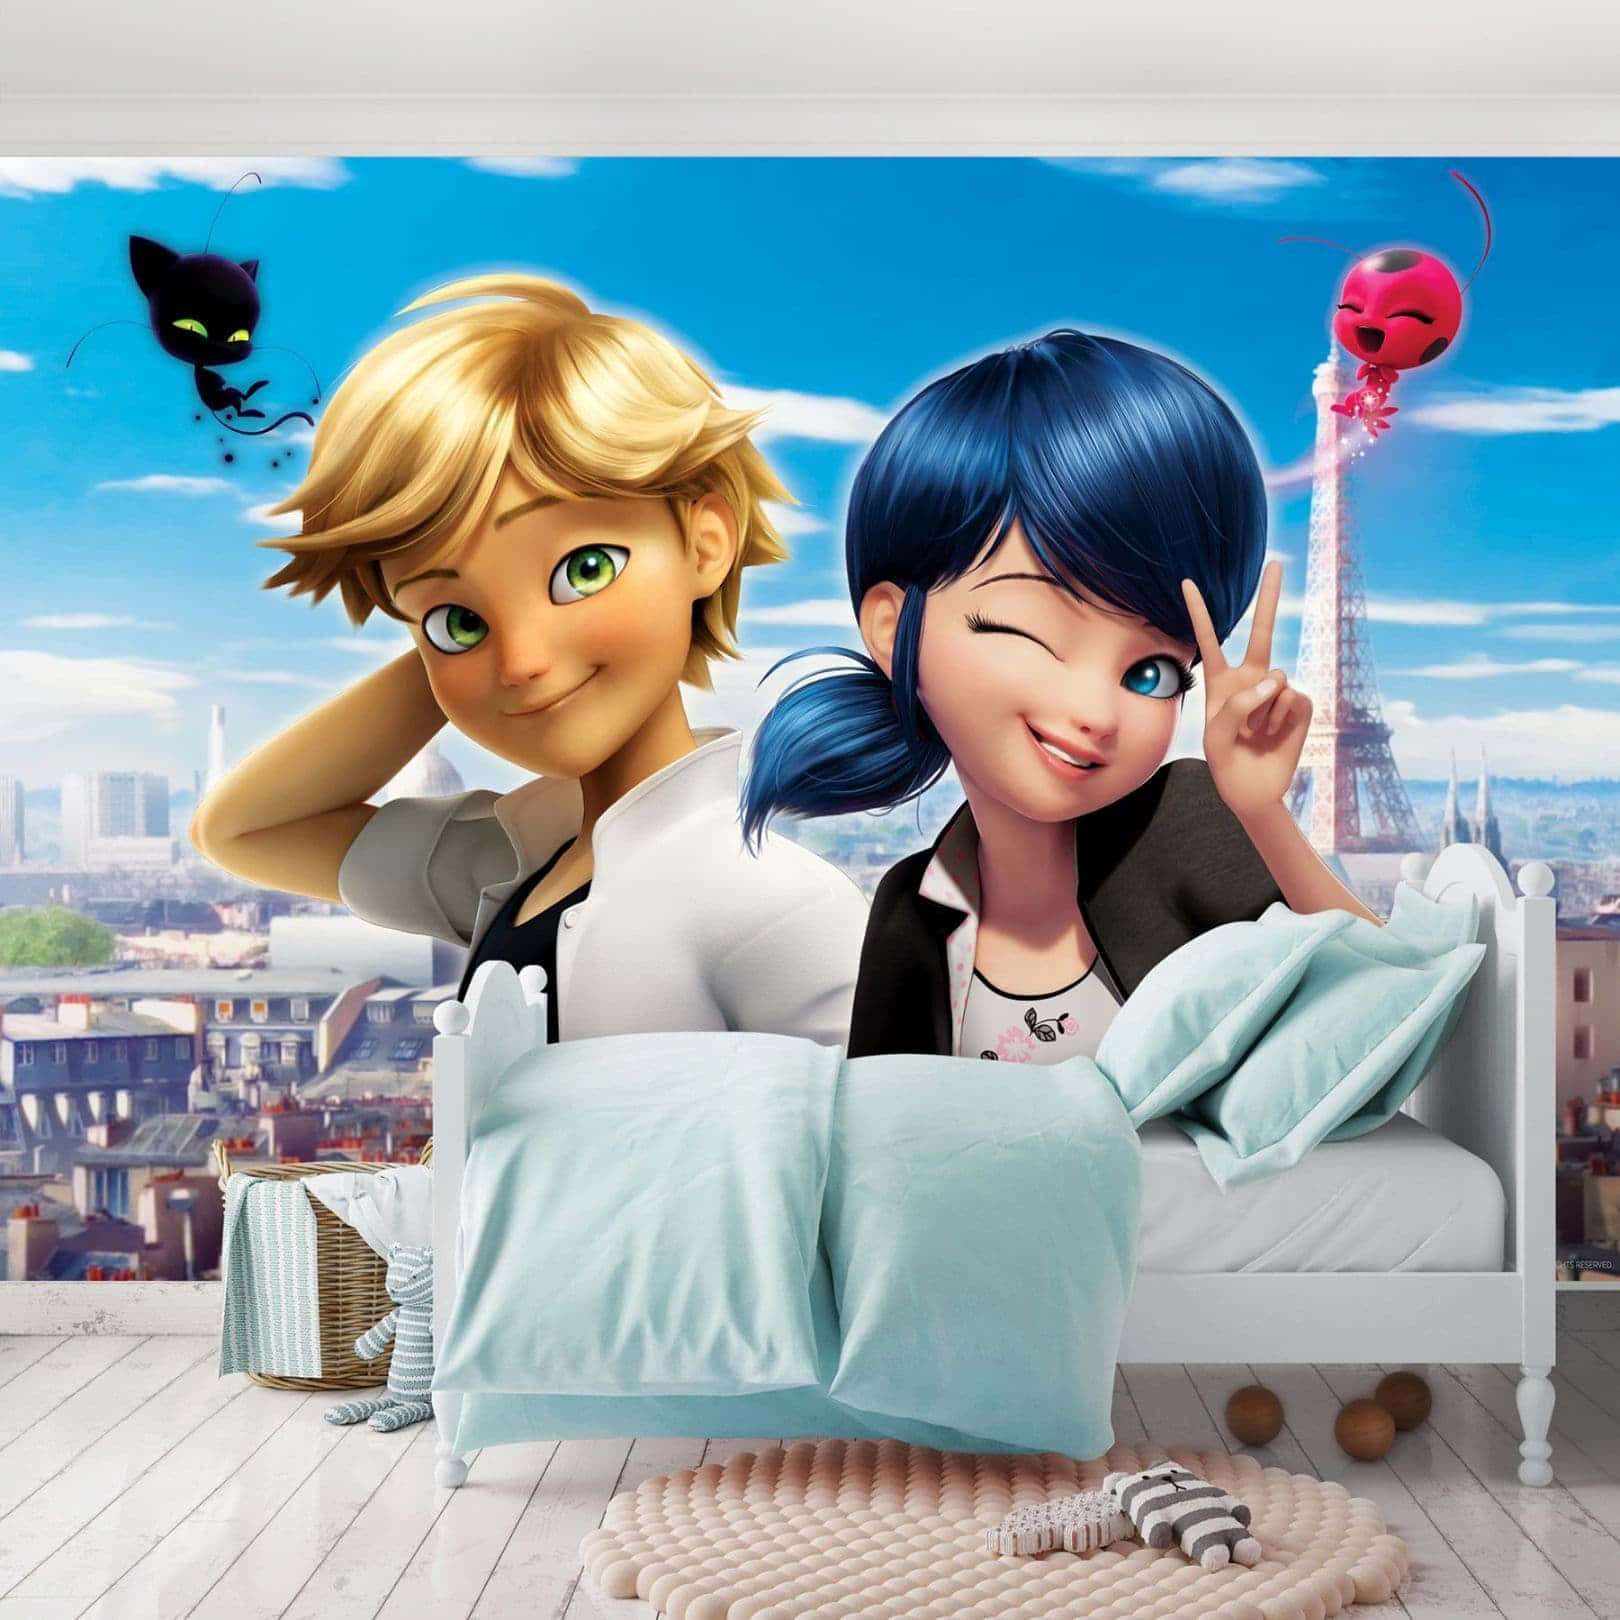 Adrien and Marinette creating an adventure together Wallpaper